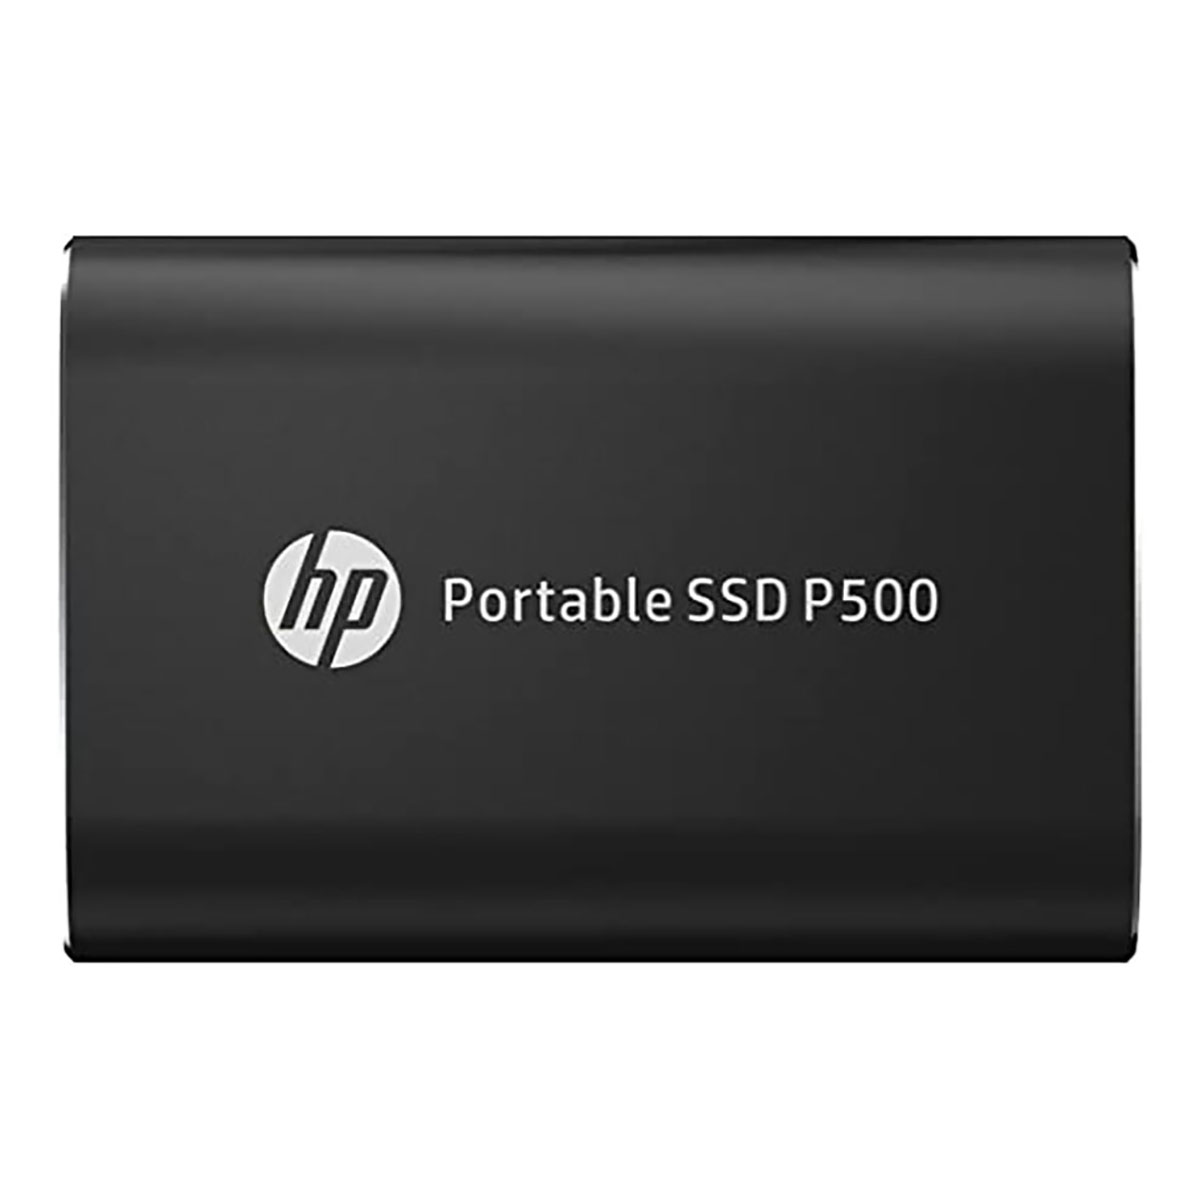 Hewlett-Packard - P500 500GB Portable SSD - Up to 380MB/s